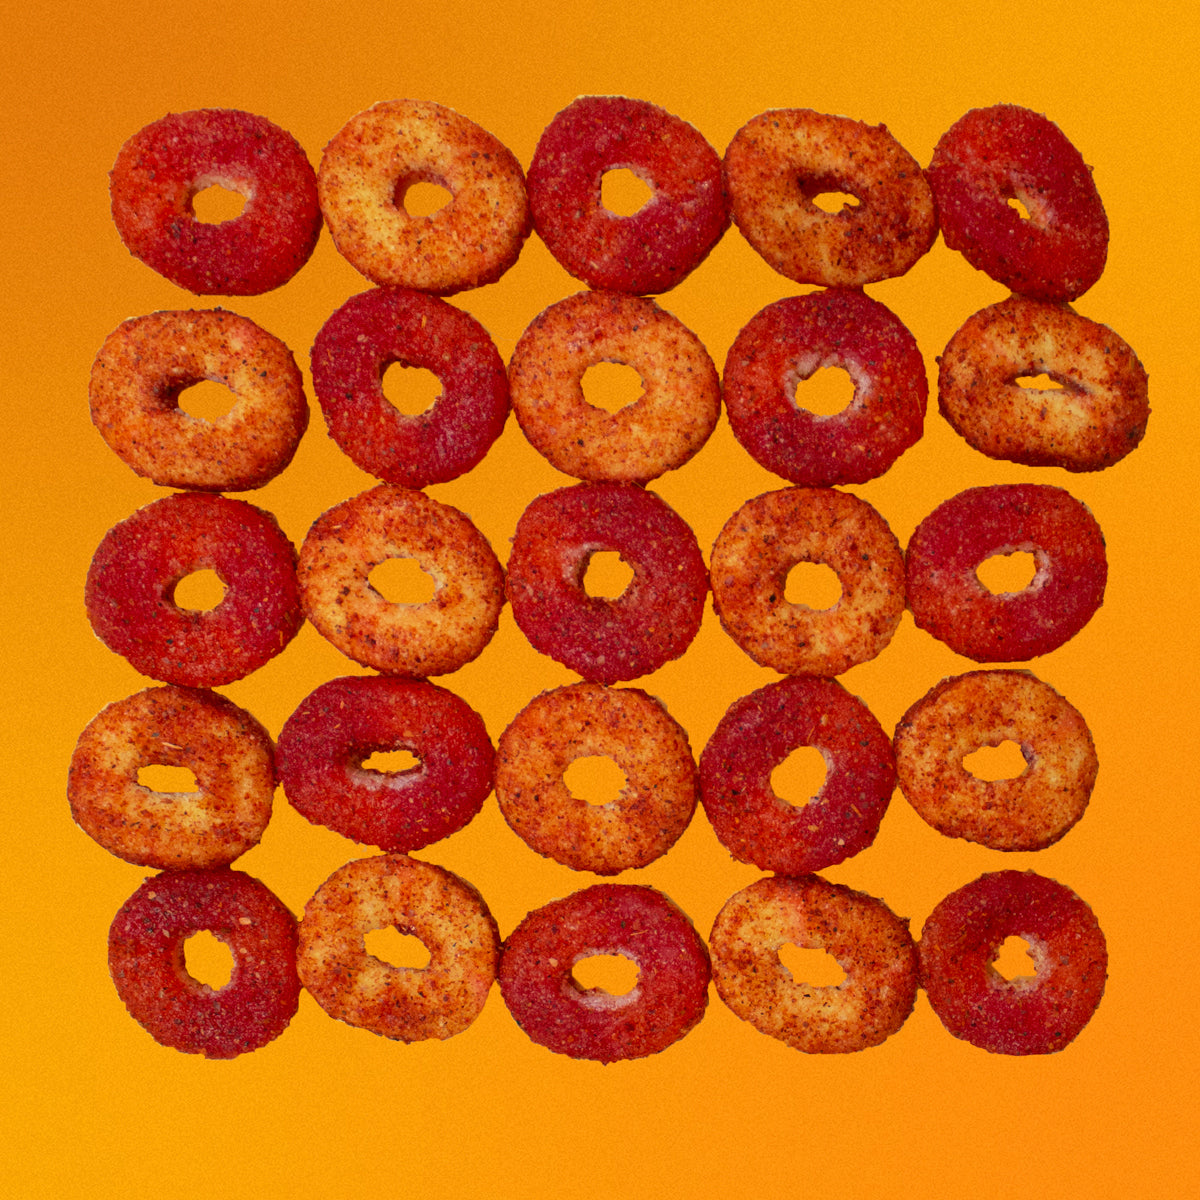 Repeating pattern of peach rings dulces enchilados in front of yellow background